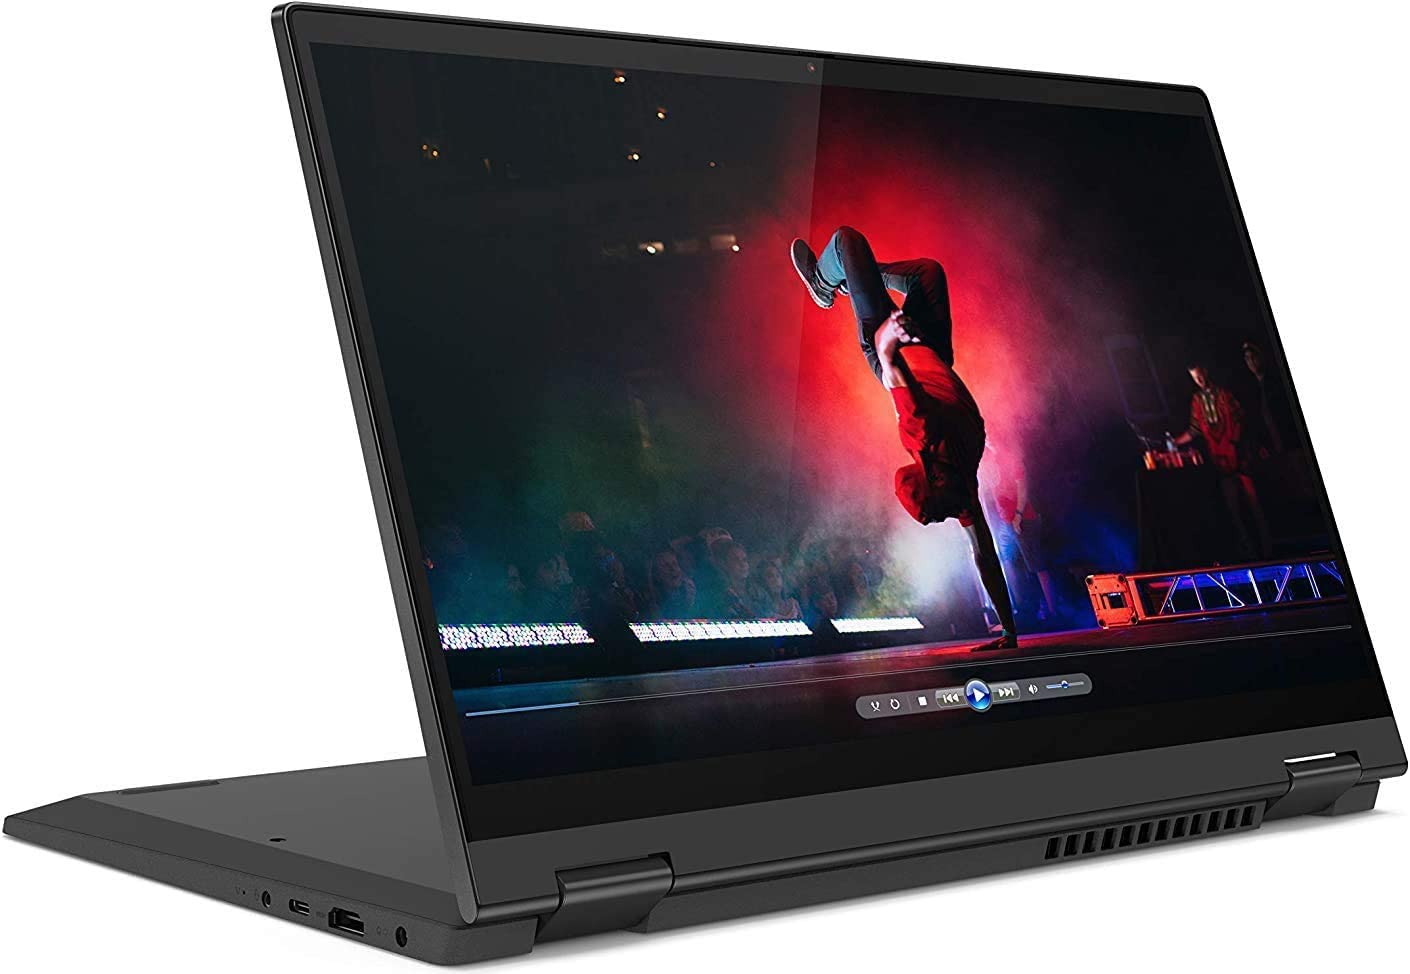 Lenovo IdeaPad Flex 5 - Guide to Finding the Best Laptop